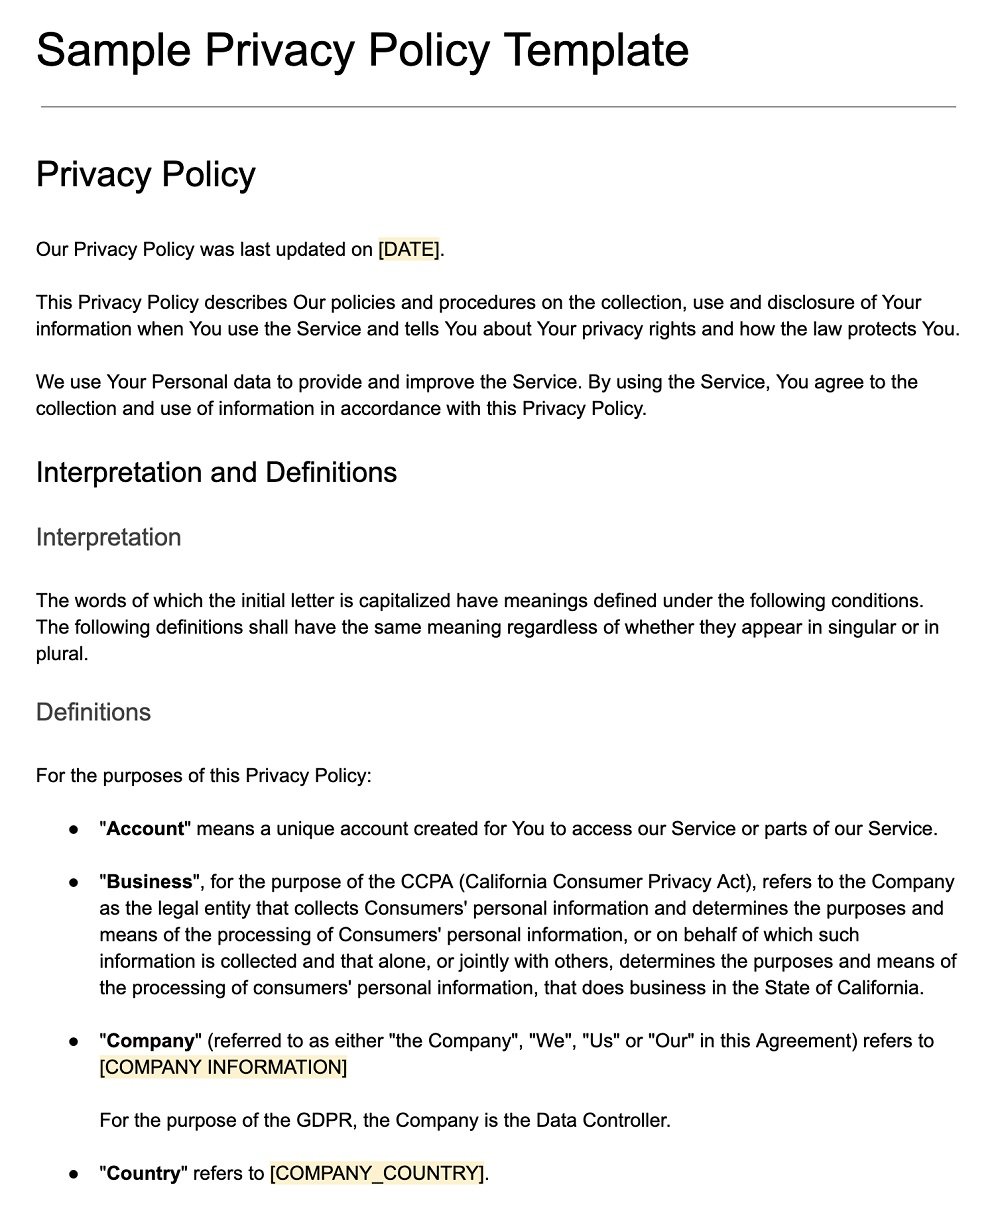 Sample Privacy Policy Template - TermsFeed Regarding Credit Card Privacy Policy Template